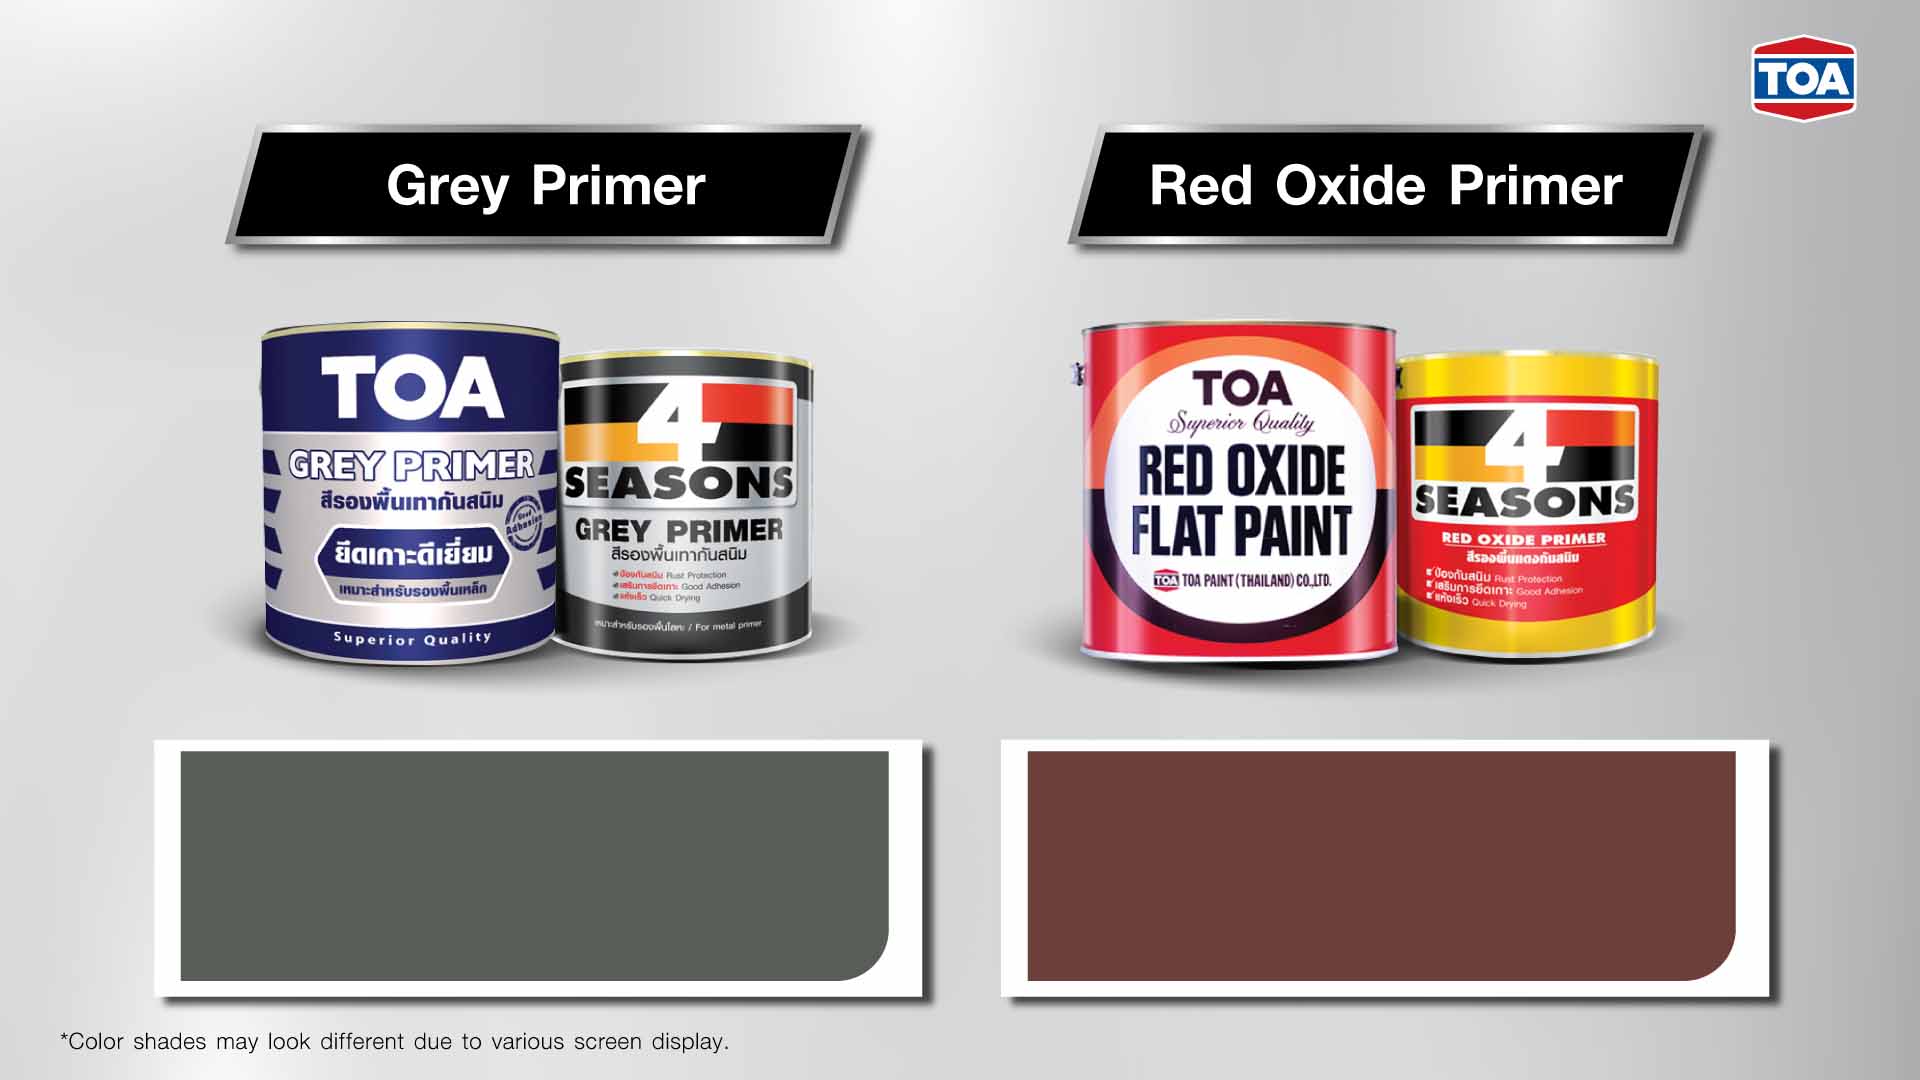 The color shades of TOA rust-proof paint